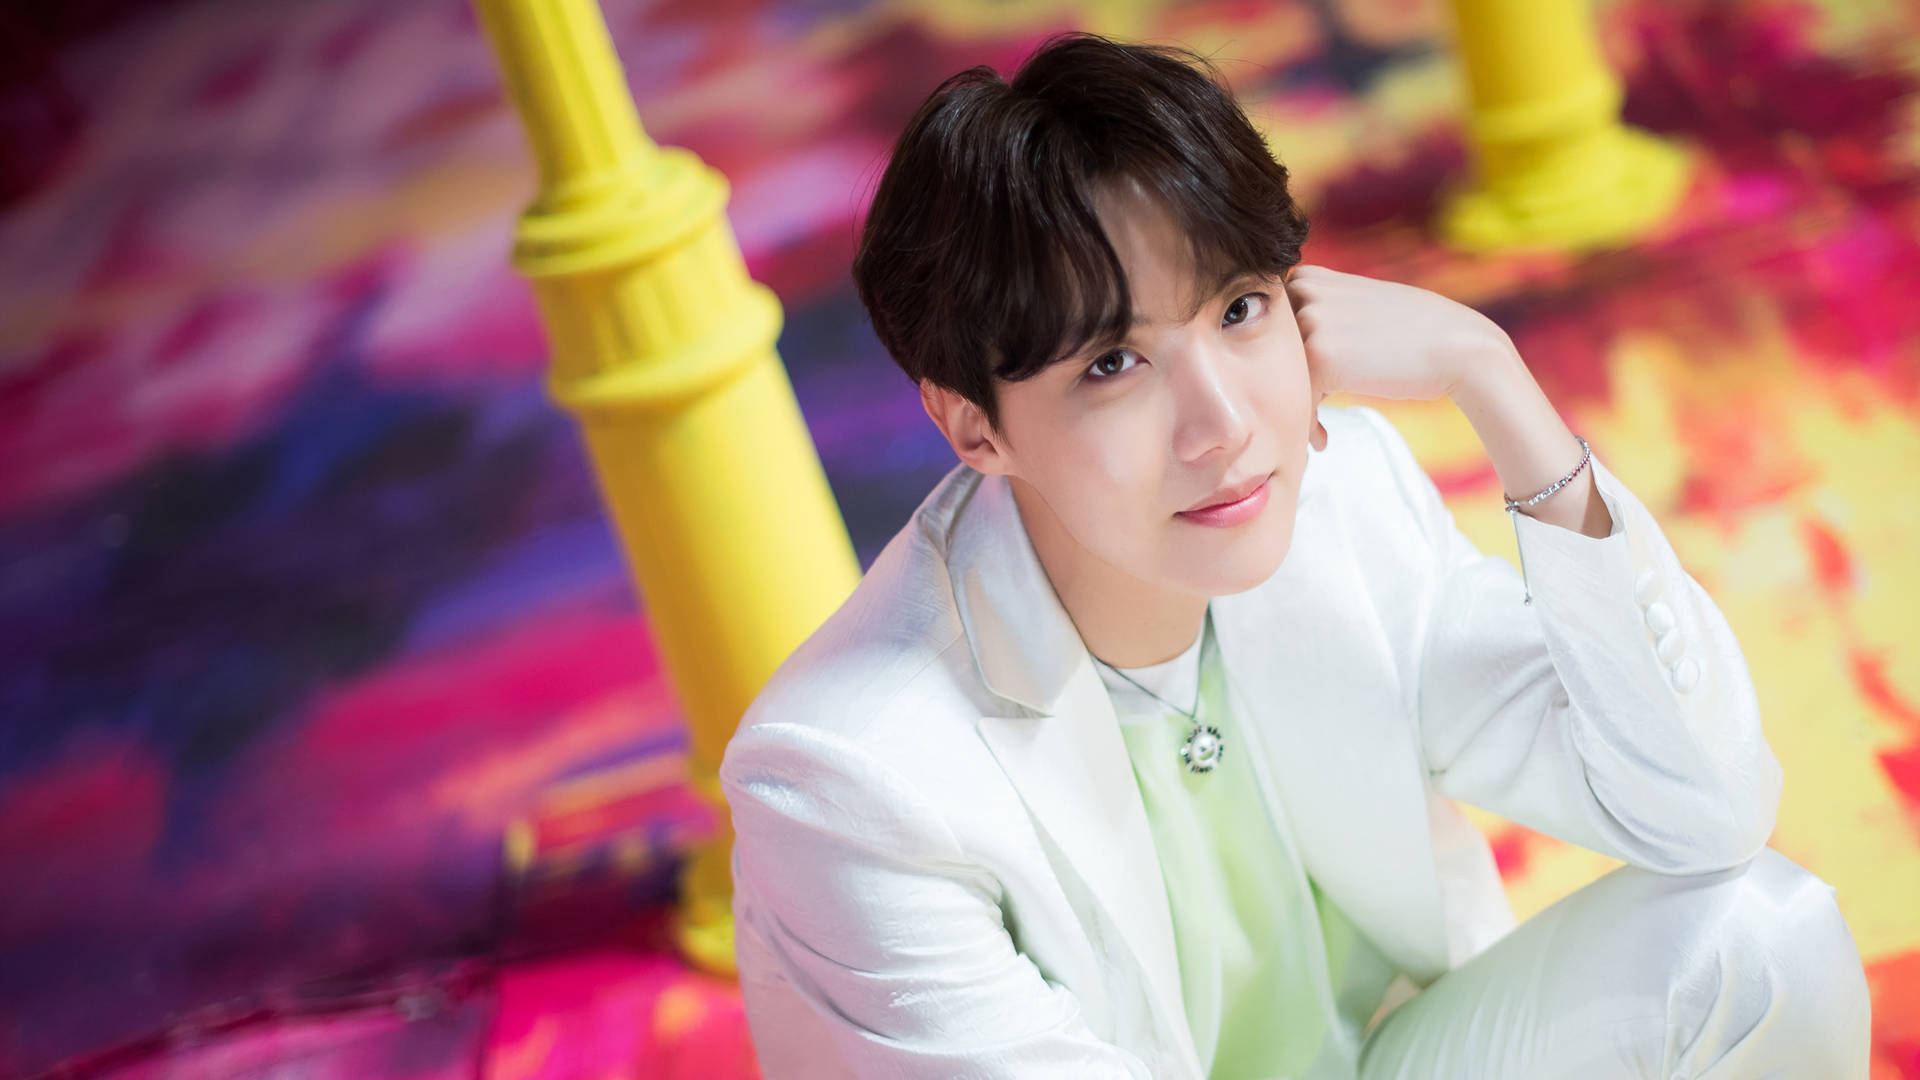 Boy With Luv J-hope Wallpaper